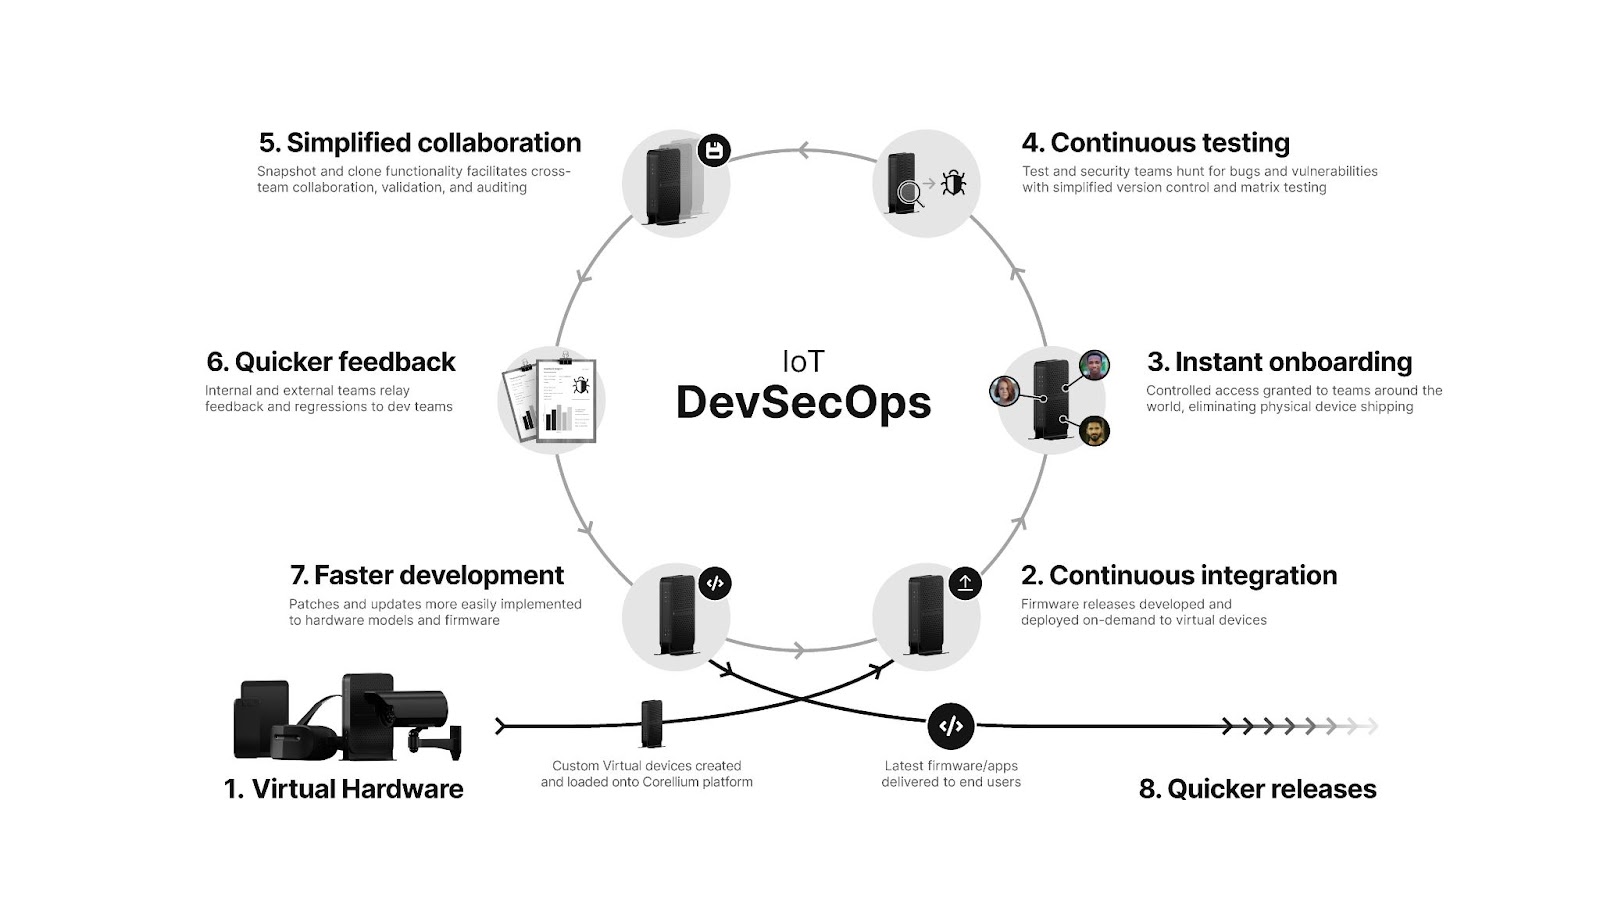  A chart outlining the streamlined lifecycle of DevSecOps that can be achieved through virtualization.